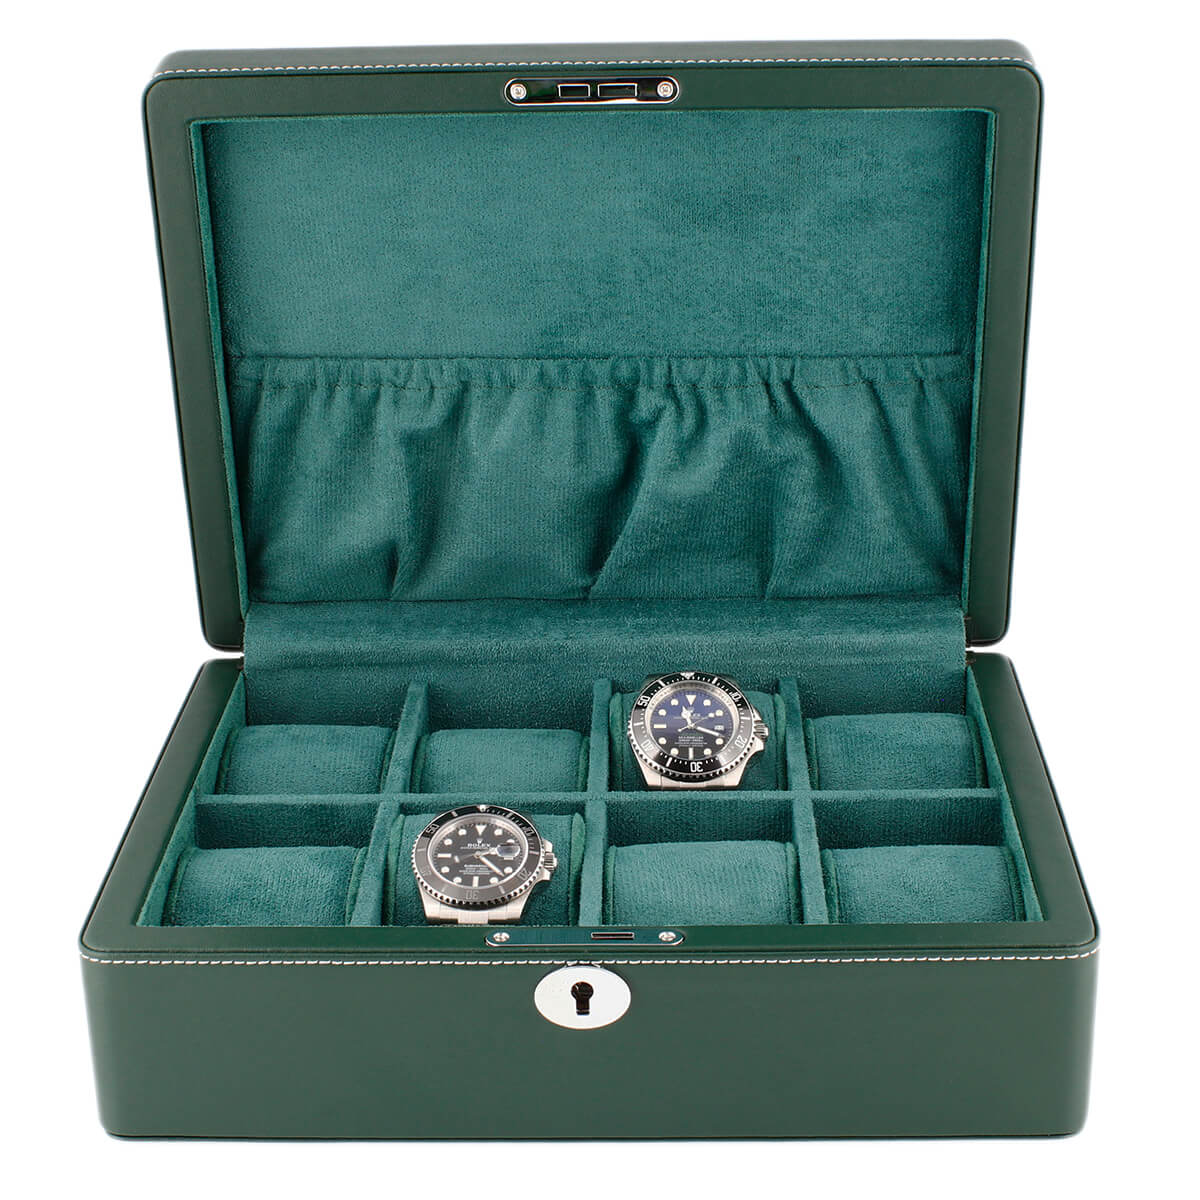 8 Watch Box in Green Leather Finish Fine Quality by Aevitas